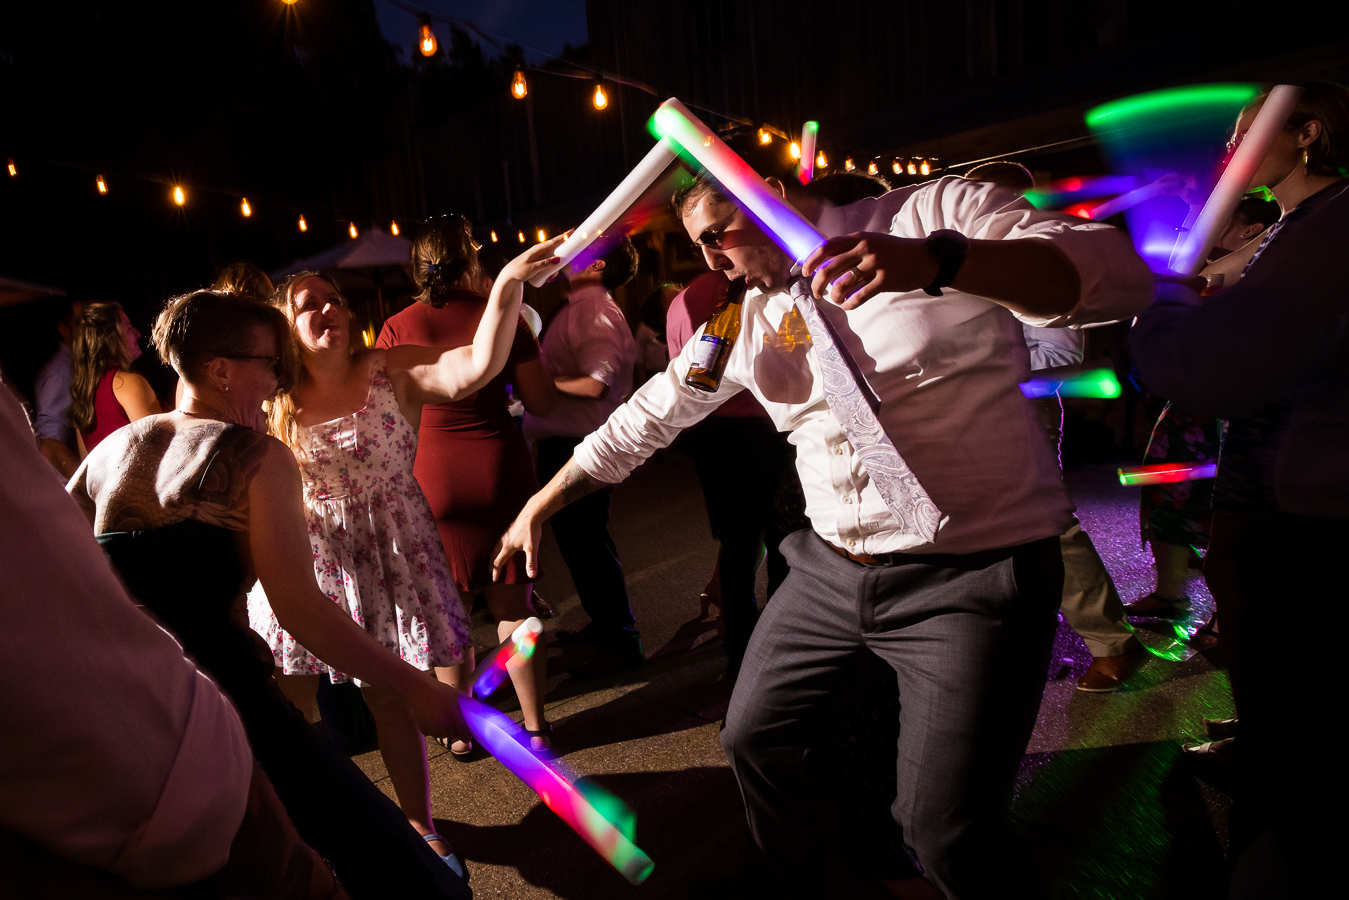 fun, creative Oak Lodge Wedding Photographer, rhinehart photography, captures this fun, candid, vibrant image of friends at the wedding as they dance with each other during this outdoor wedding reception with giant glow sticks that light up the dance floor 